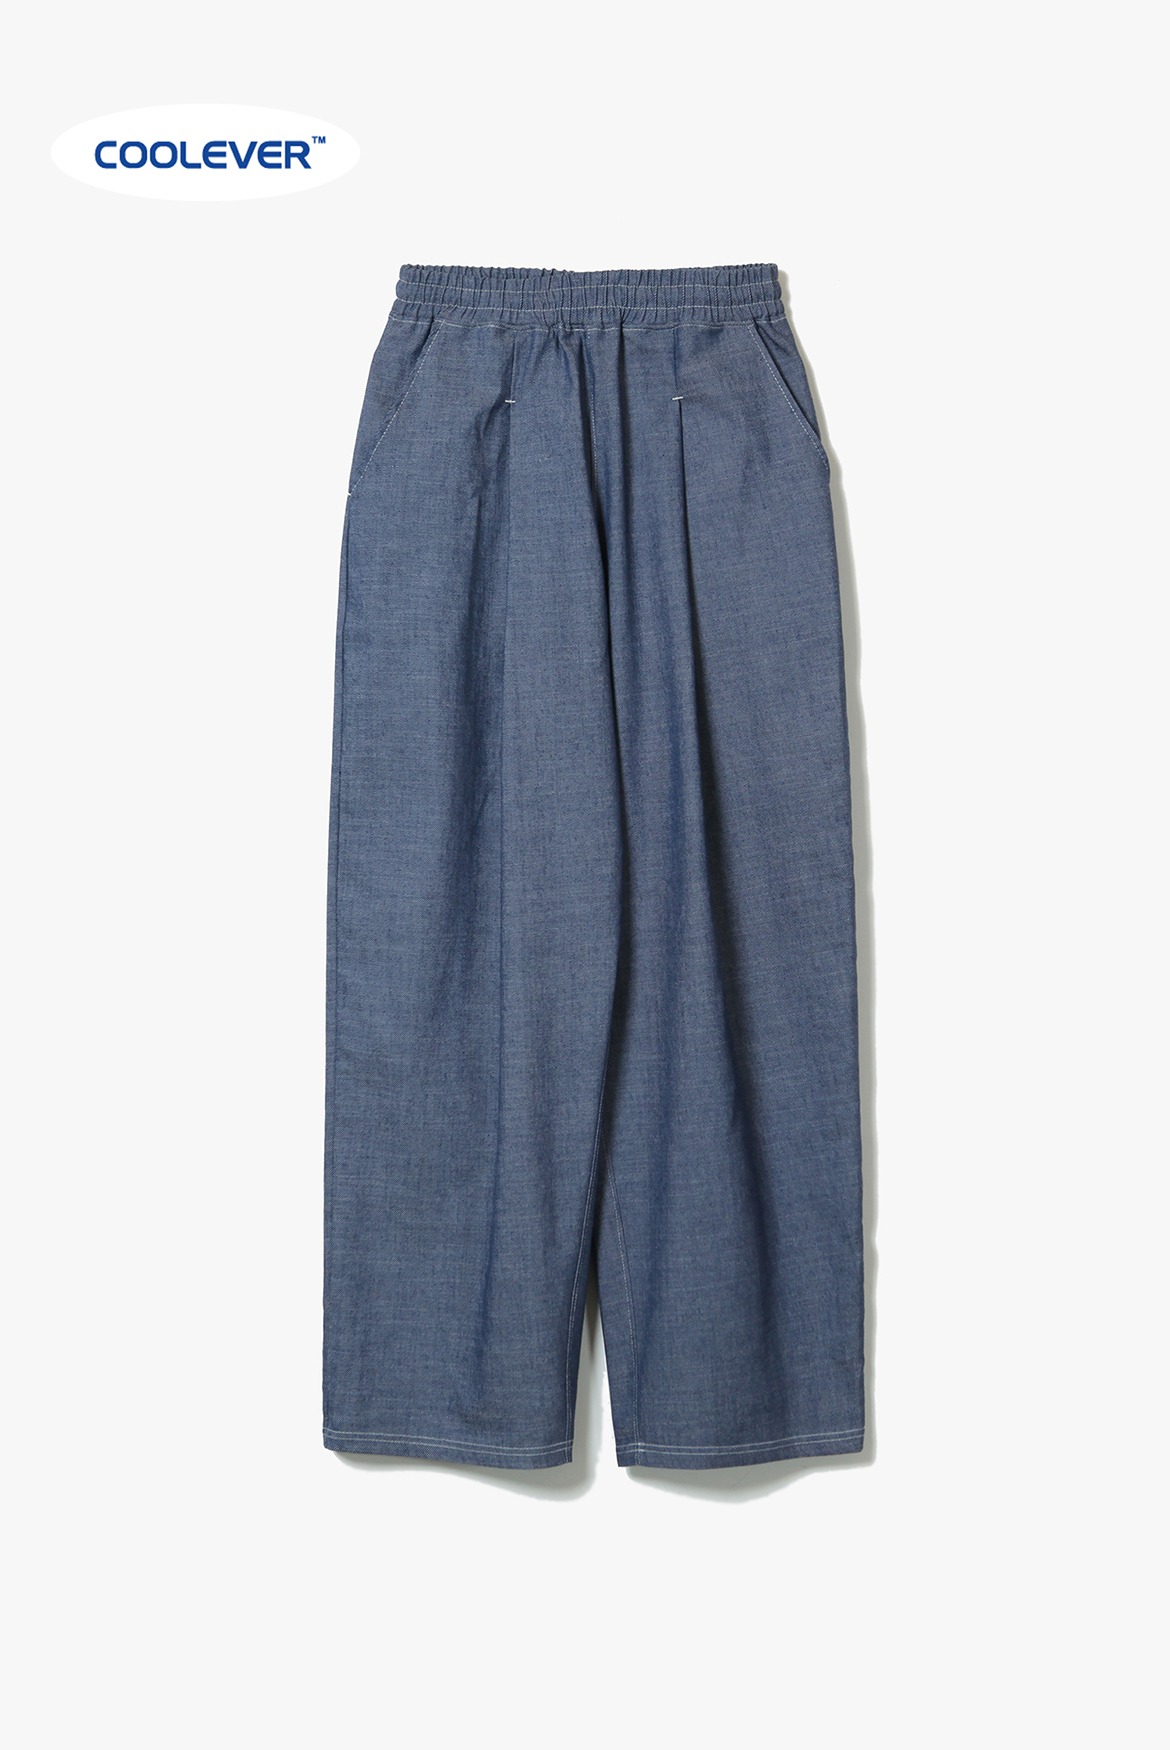 Clean Coolever Tuck Banding Pants [Mid Blue]